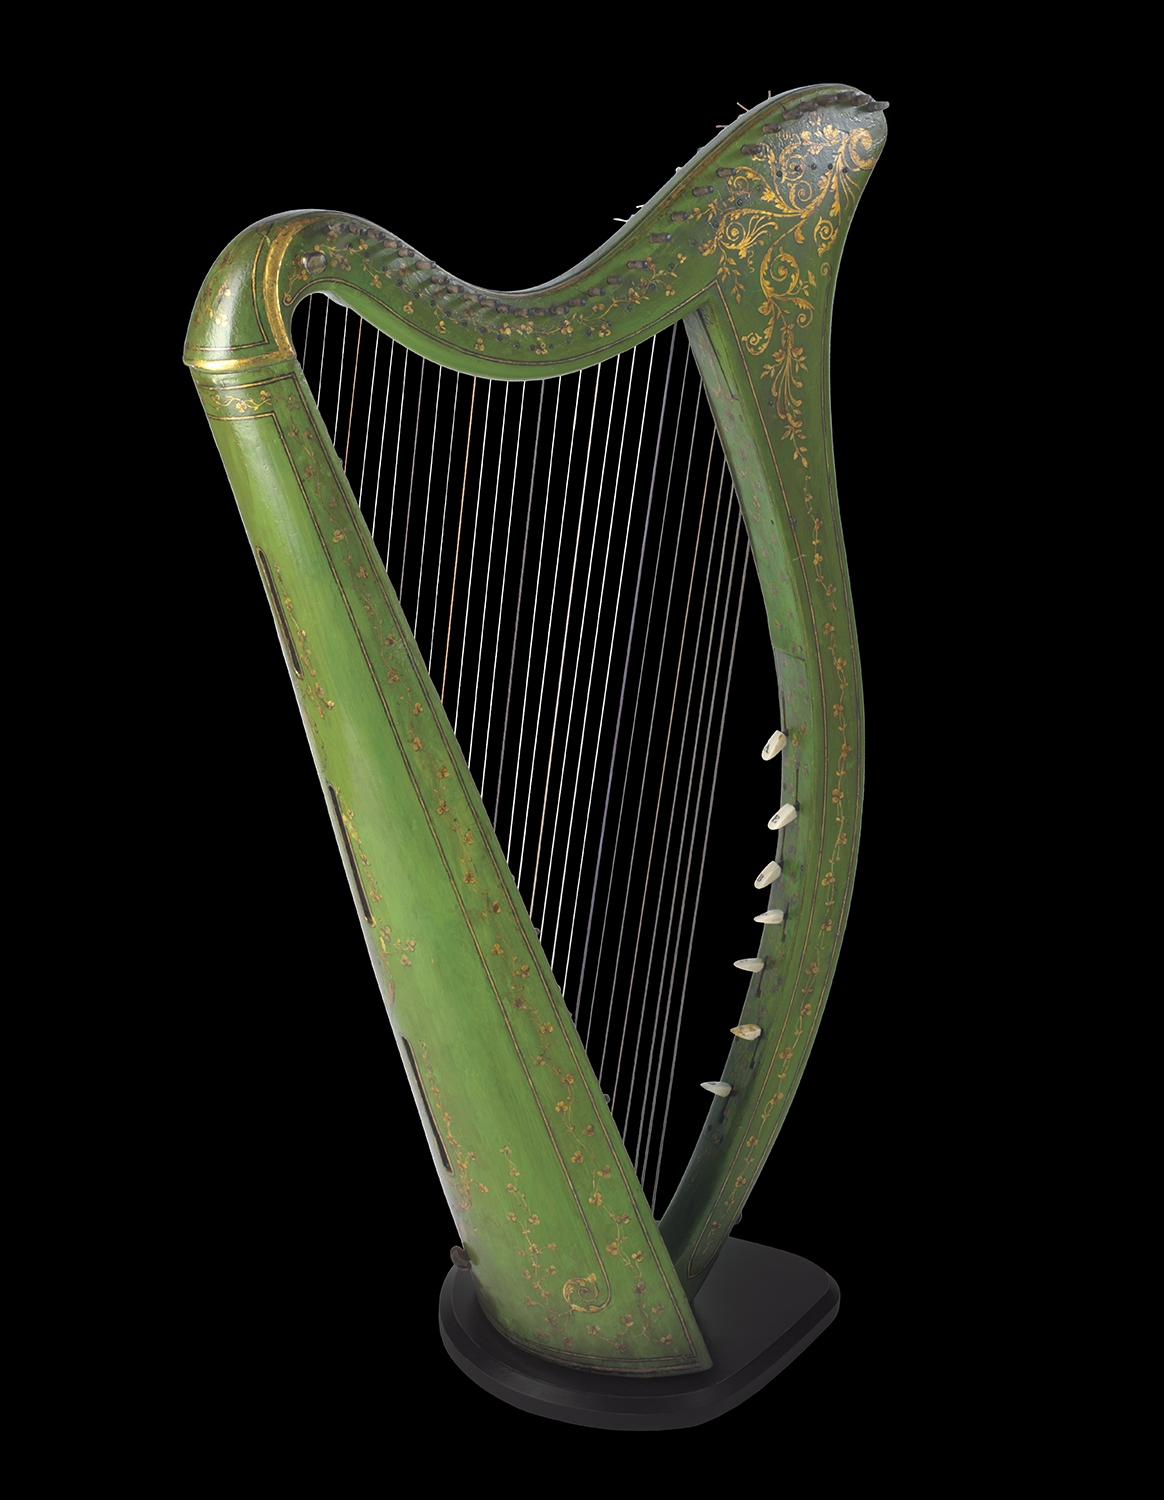 John Egan Portable Harp, c. 1820. John Egan was an Irish musical instrument maker who is considered the father of the modern Irish harp. Egan overcame the restrictions of the traditional Irish harp by creating "portables". Eighty of his classic harps are known to exist. The O’Brien Collection.